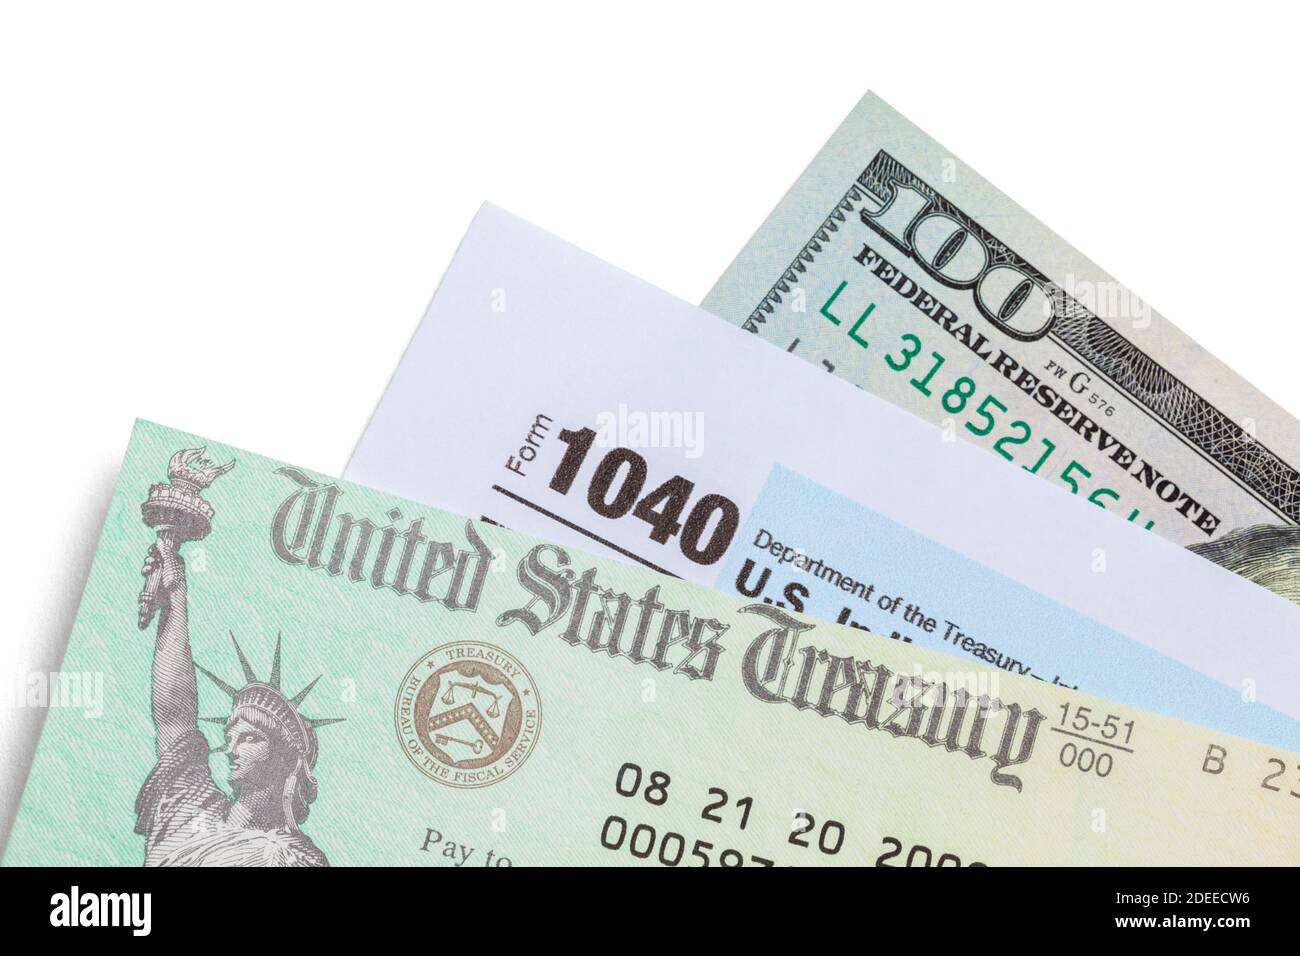 Tax Refund Check with Form 1040 and One Hundred Dollar Bill. Stock Photo